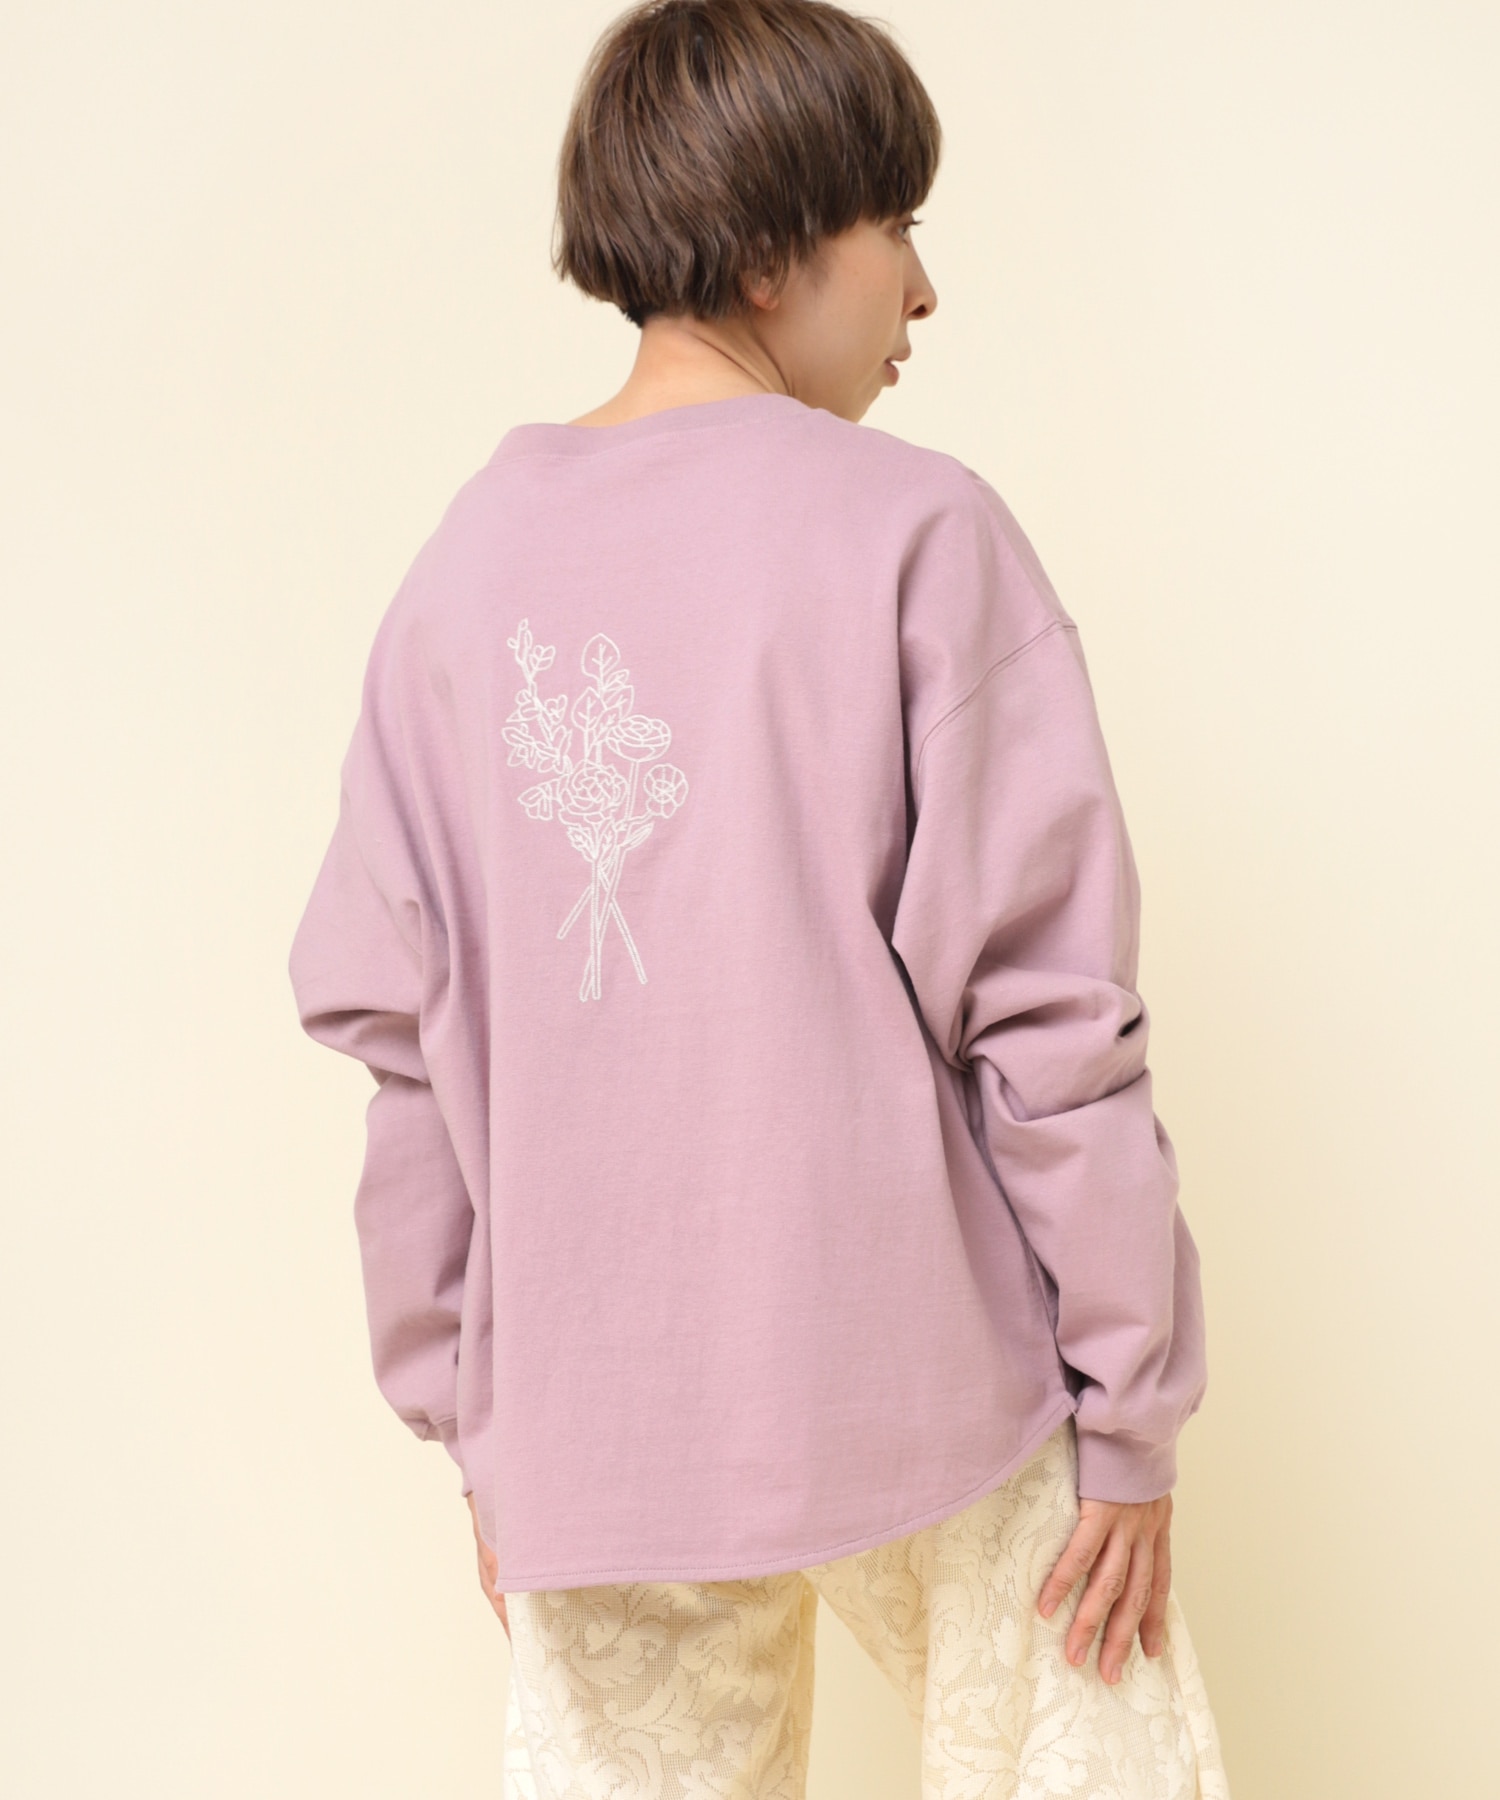 M2205 The moment&Embroidery Tシャツ